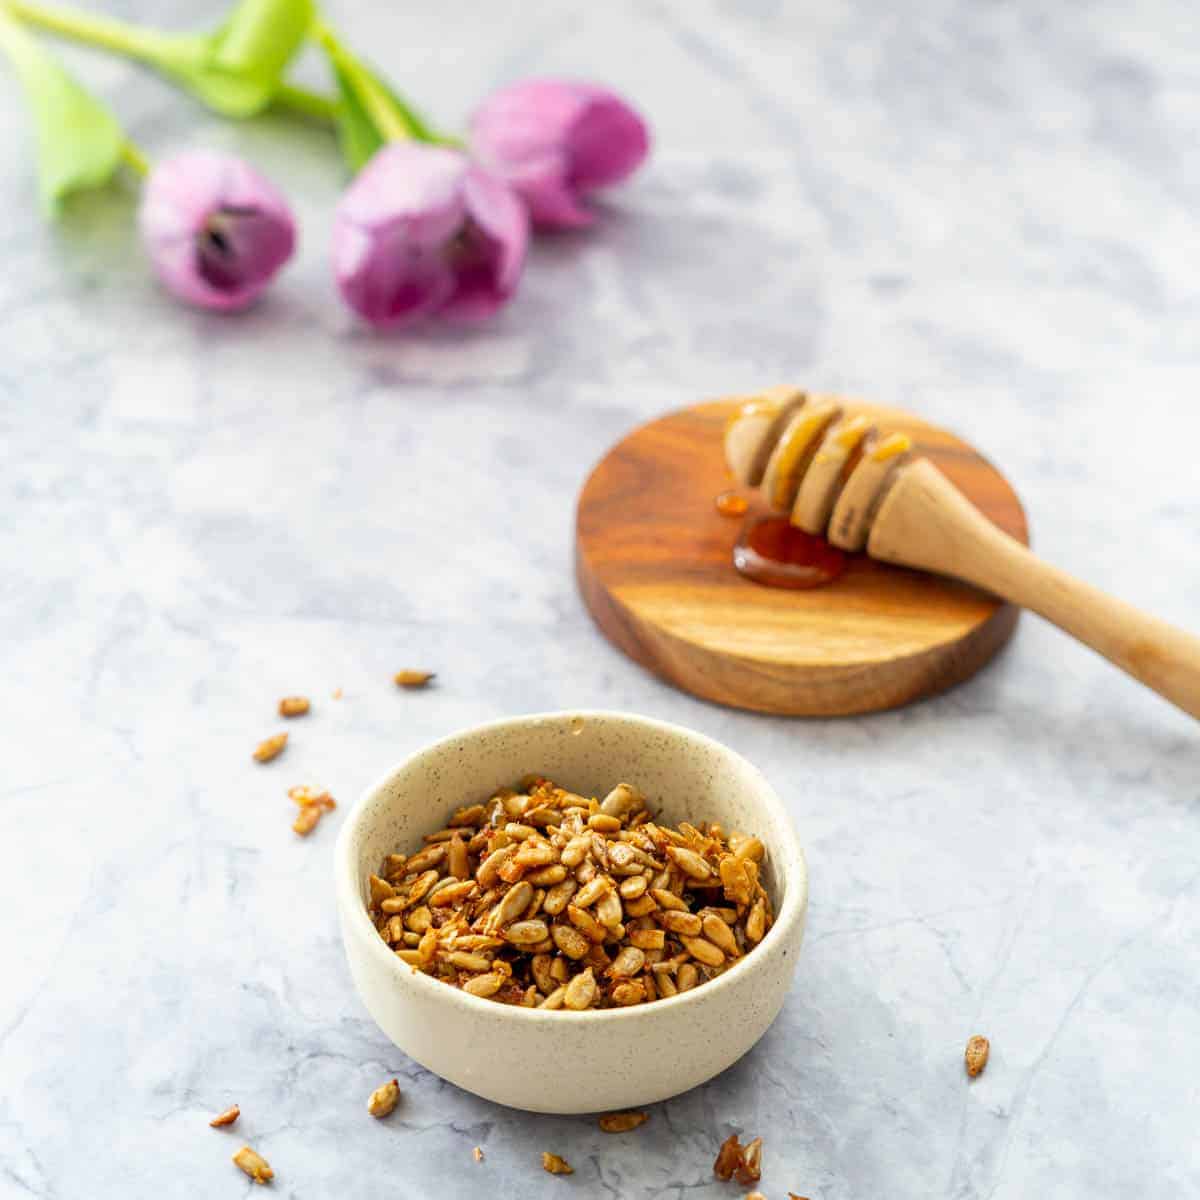 Faded in the background are some purple tulips beside the honey dipper stick on a wooden board. In front an oatmeal colour bowl with roasted seeds